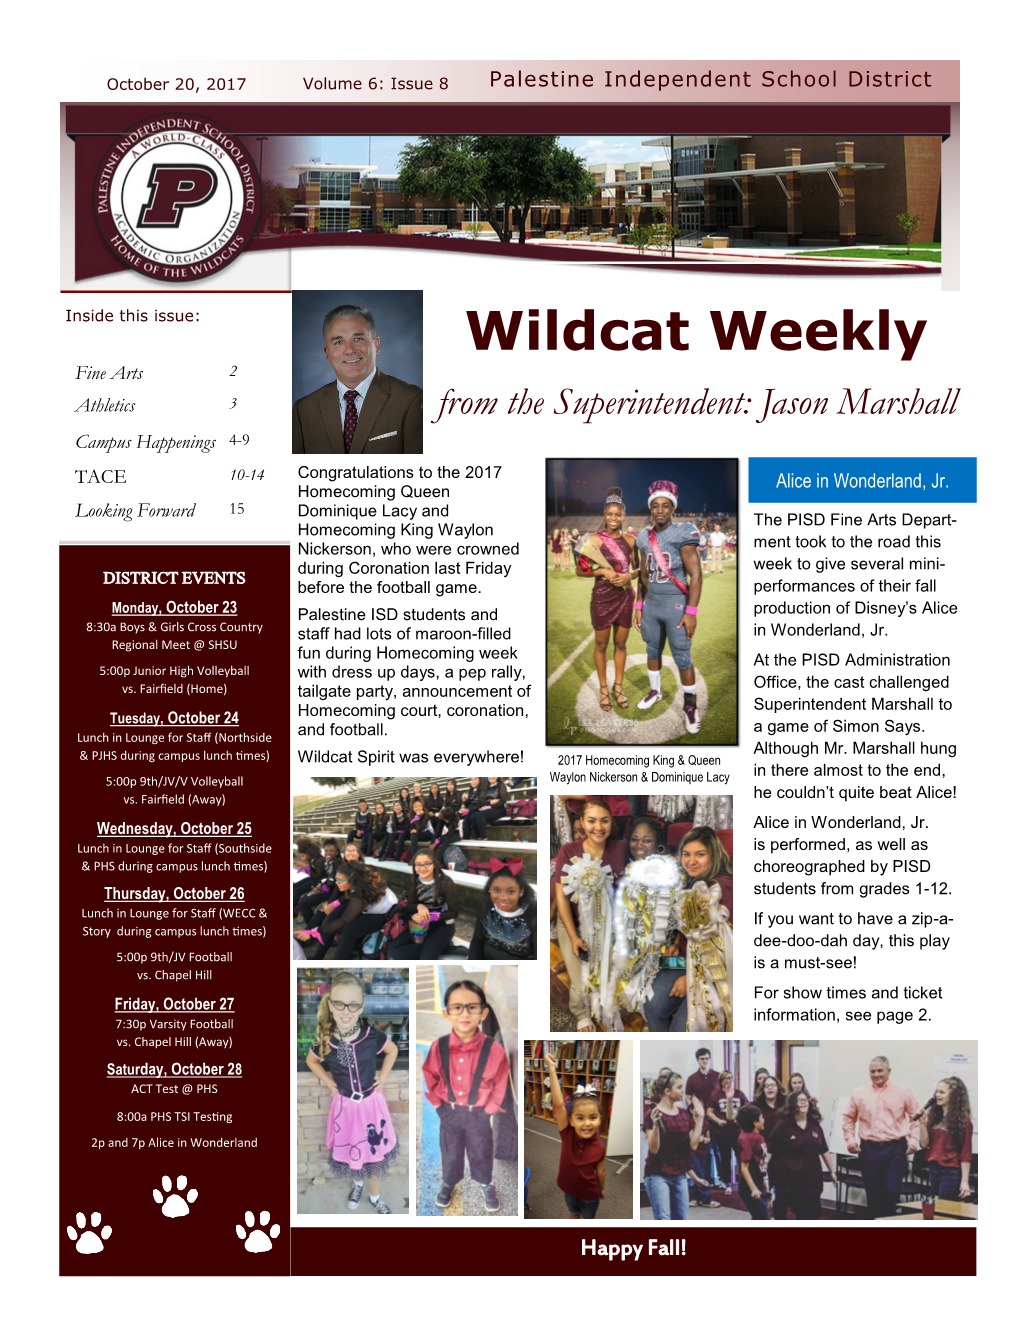 Wildcat Weekly Fine Arts 2 Athletics 3 from the Superintendent: Jason Marshall Campus Happenings 4-9 TACE 10-14 Congratulations to the 2017 Alice in Wonderland, Jr